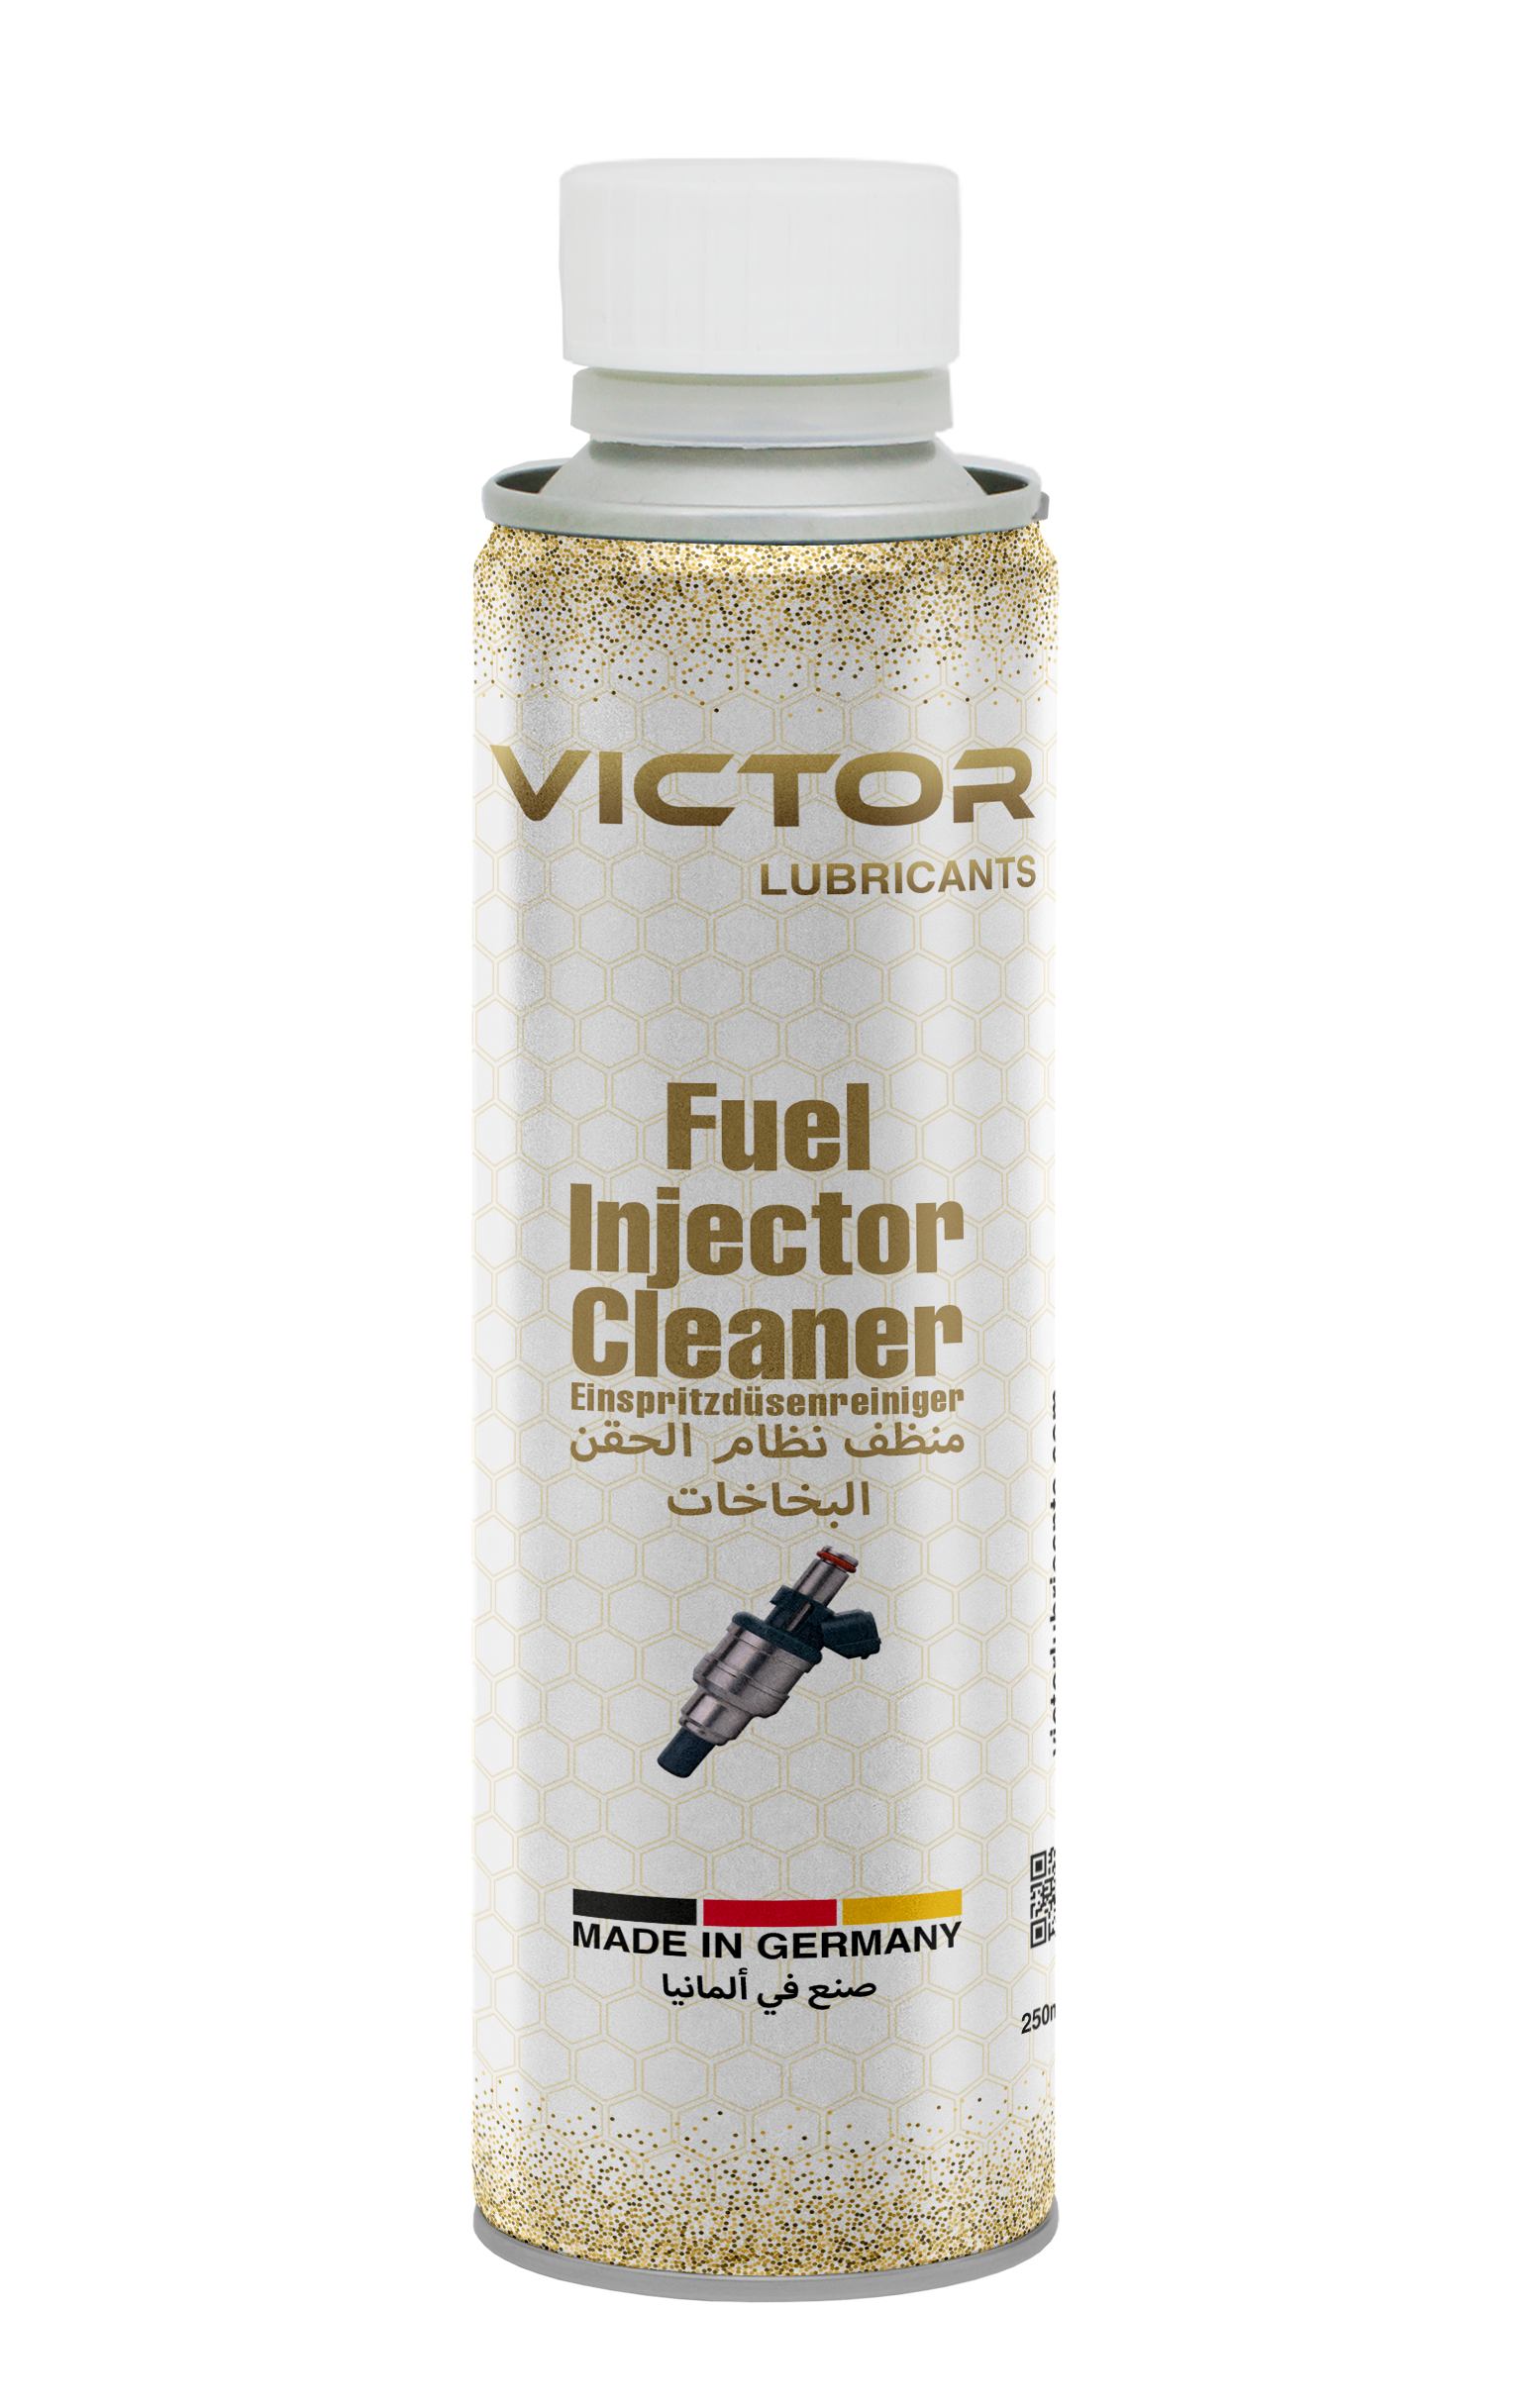 VICTOR Fuel Injector Cleaner - Victor Lubricants